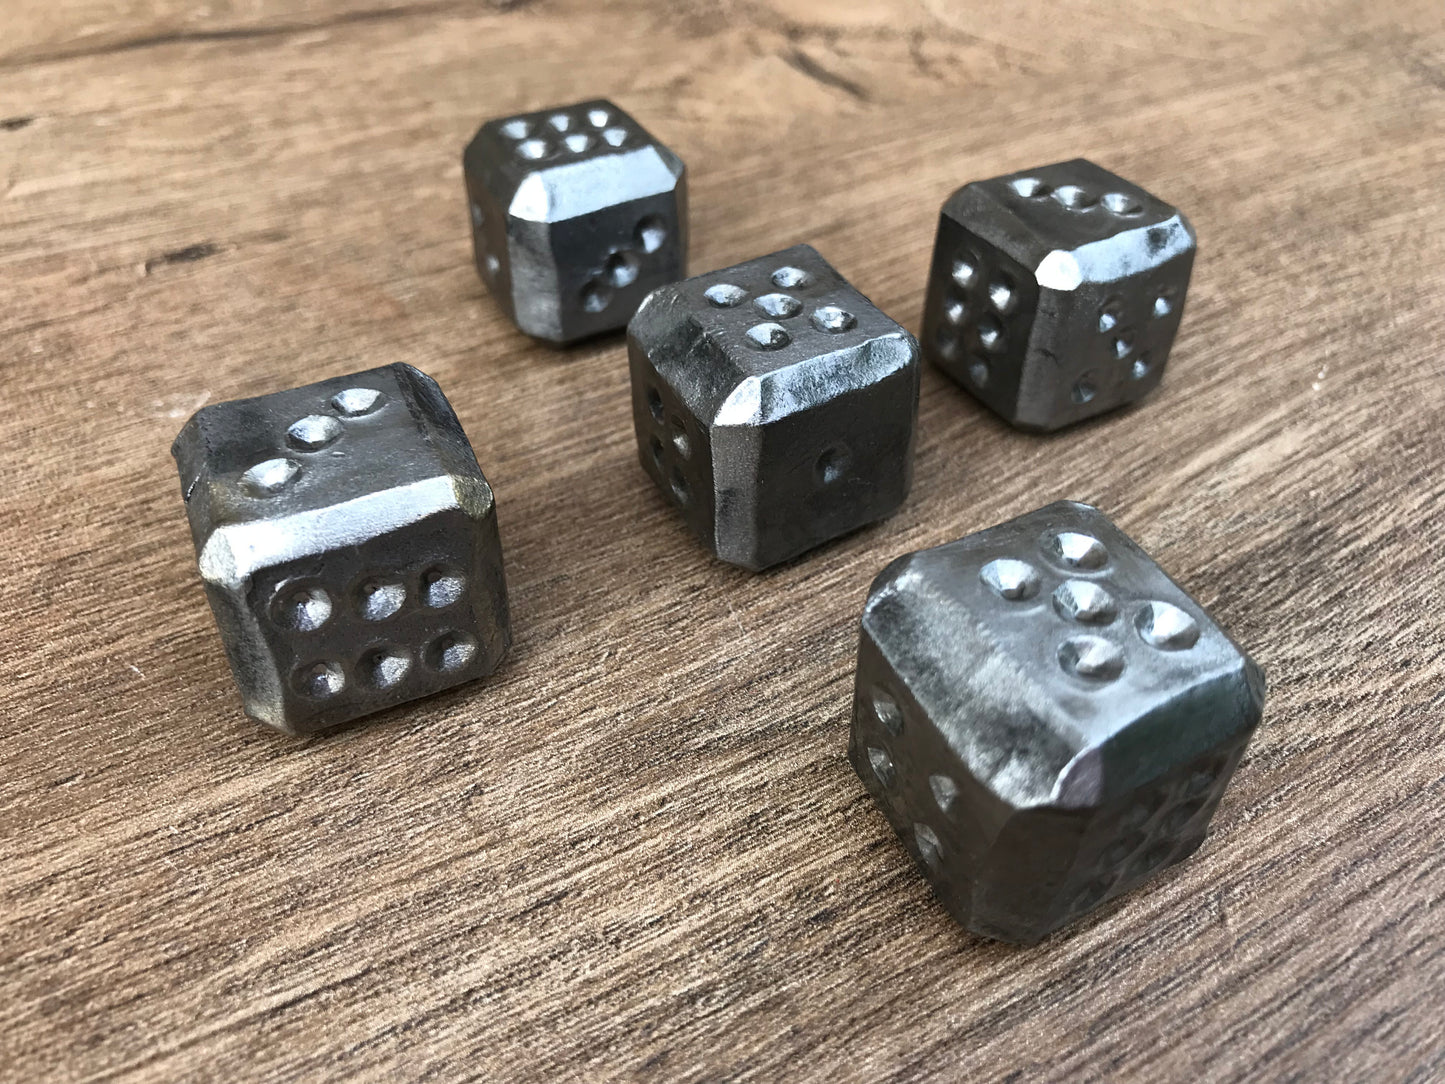 Iron dices, 6th anniversary, iron gift, iron anniversary, set of dices, custom dice, gambling dice, gaming dice, dice games, tabletop game